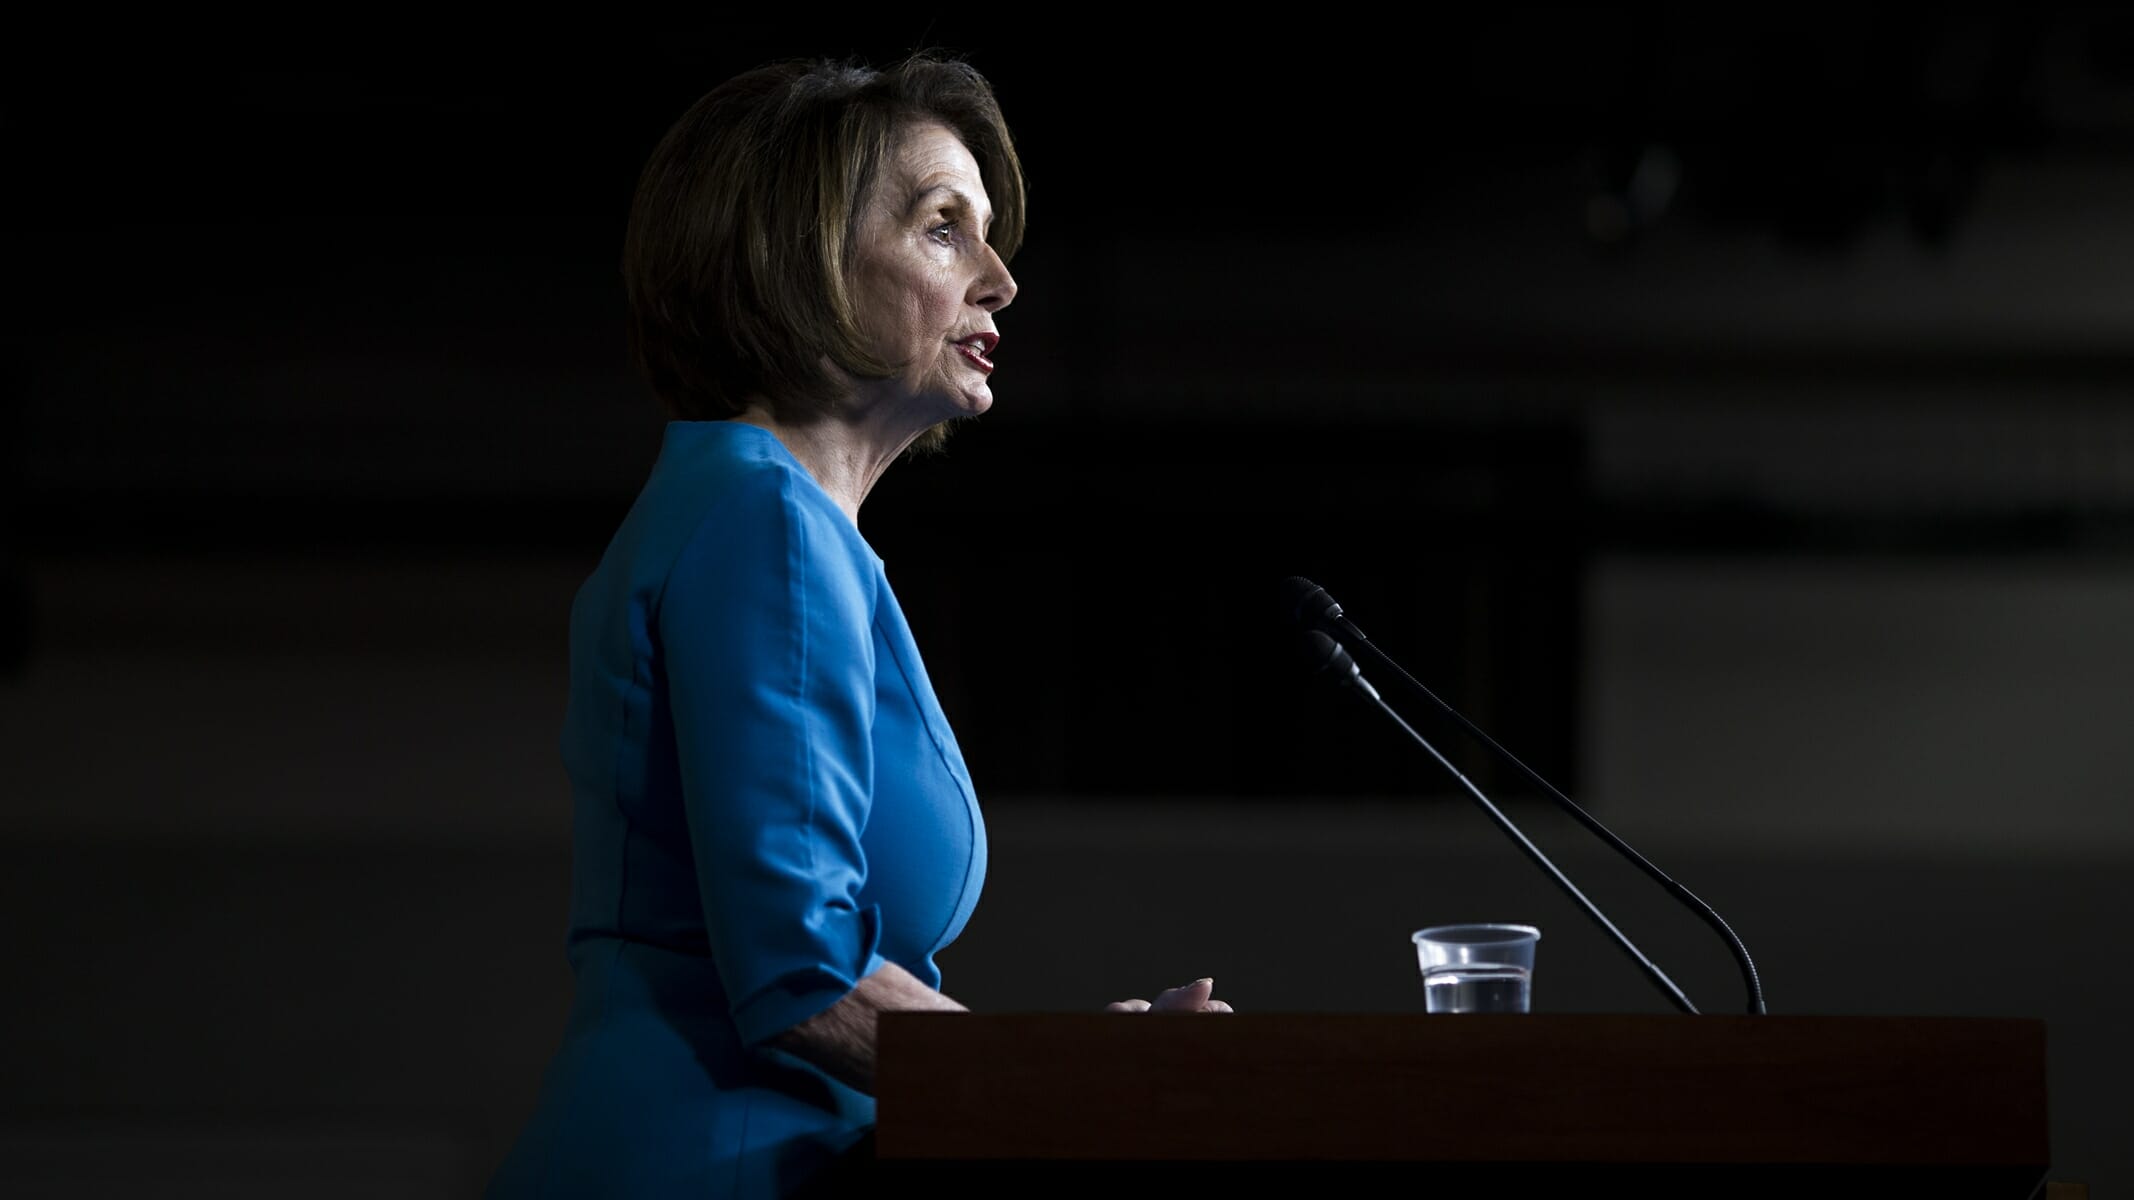 Pelosi: “This President…Engaged in a Cover Up, and That Could Be an Impeachable Offense”